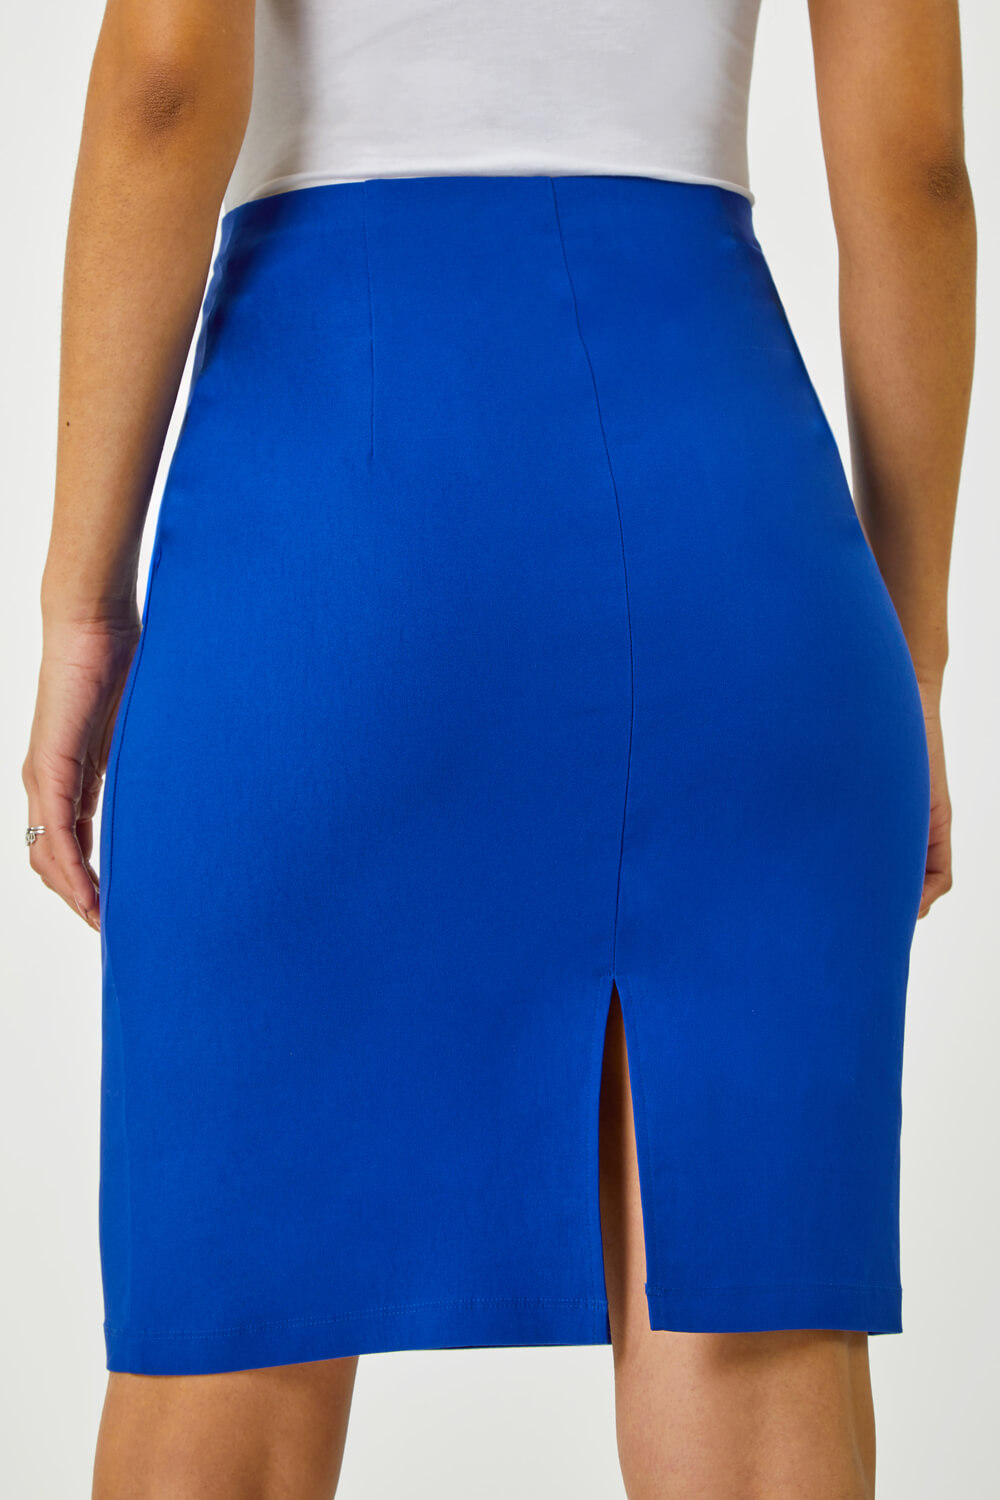 Royal Blue Pull On Stretch Pencil Skirt, Image 5 of 5